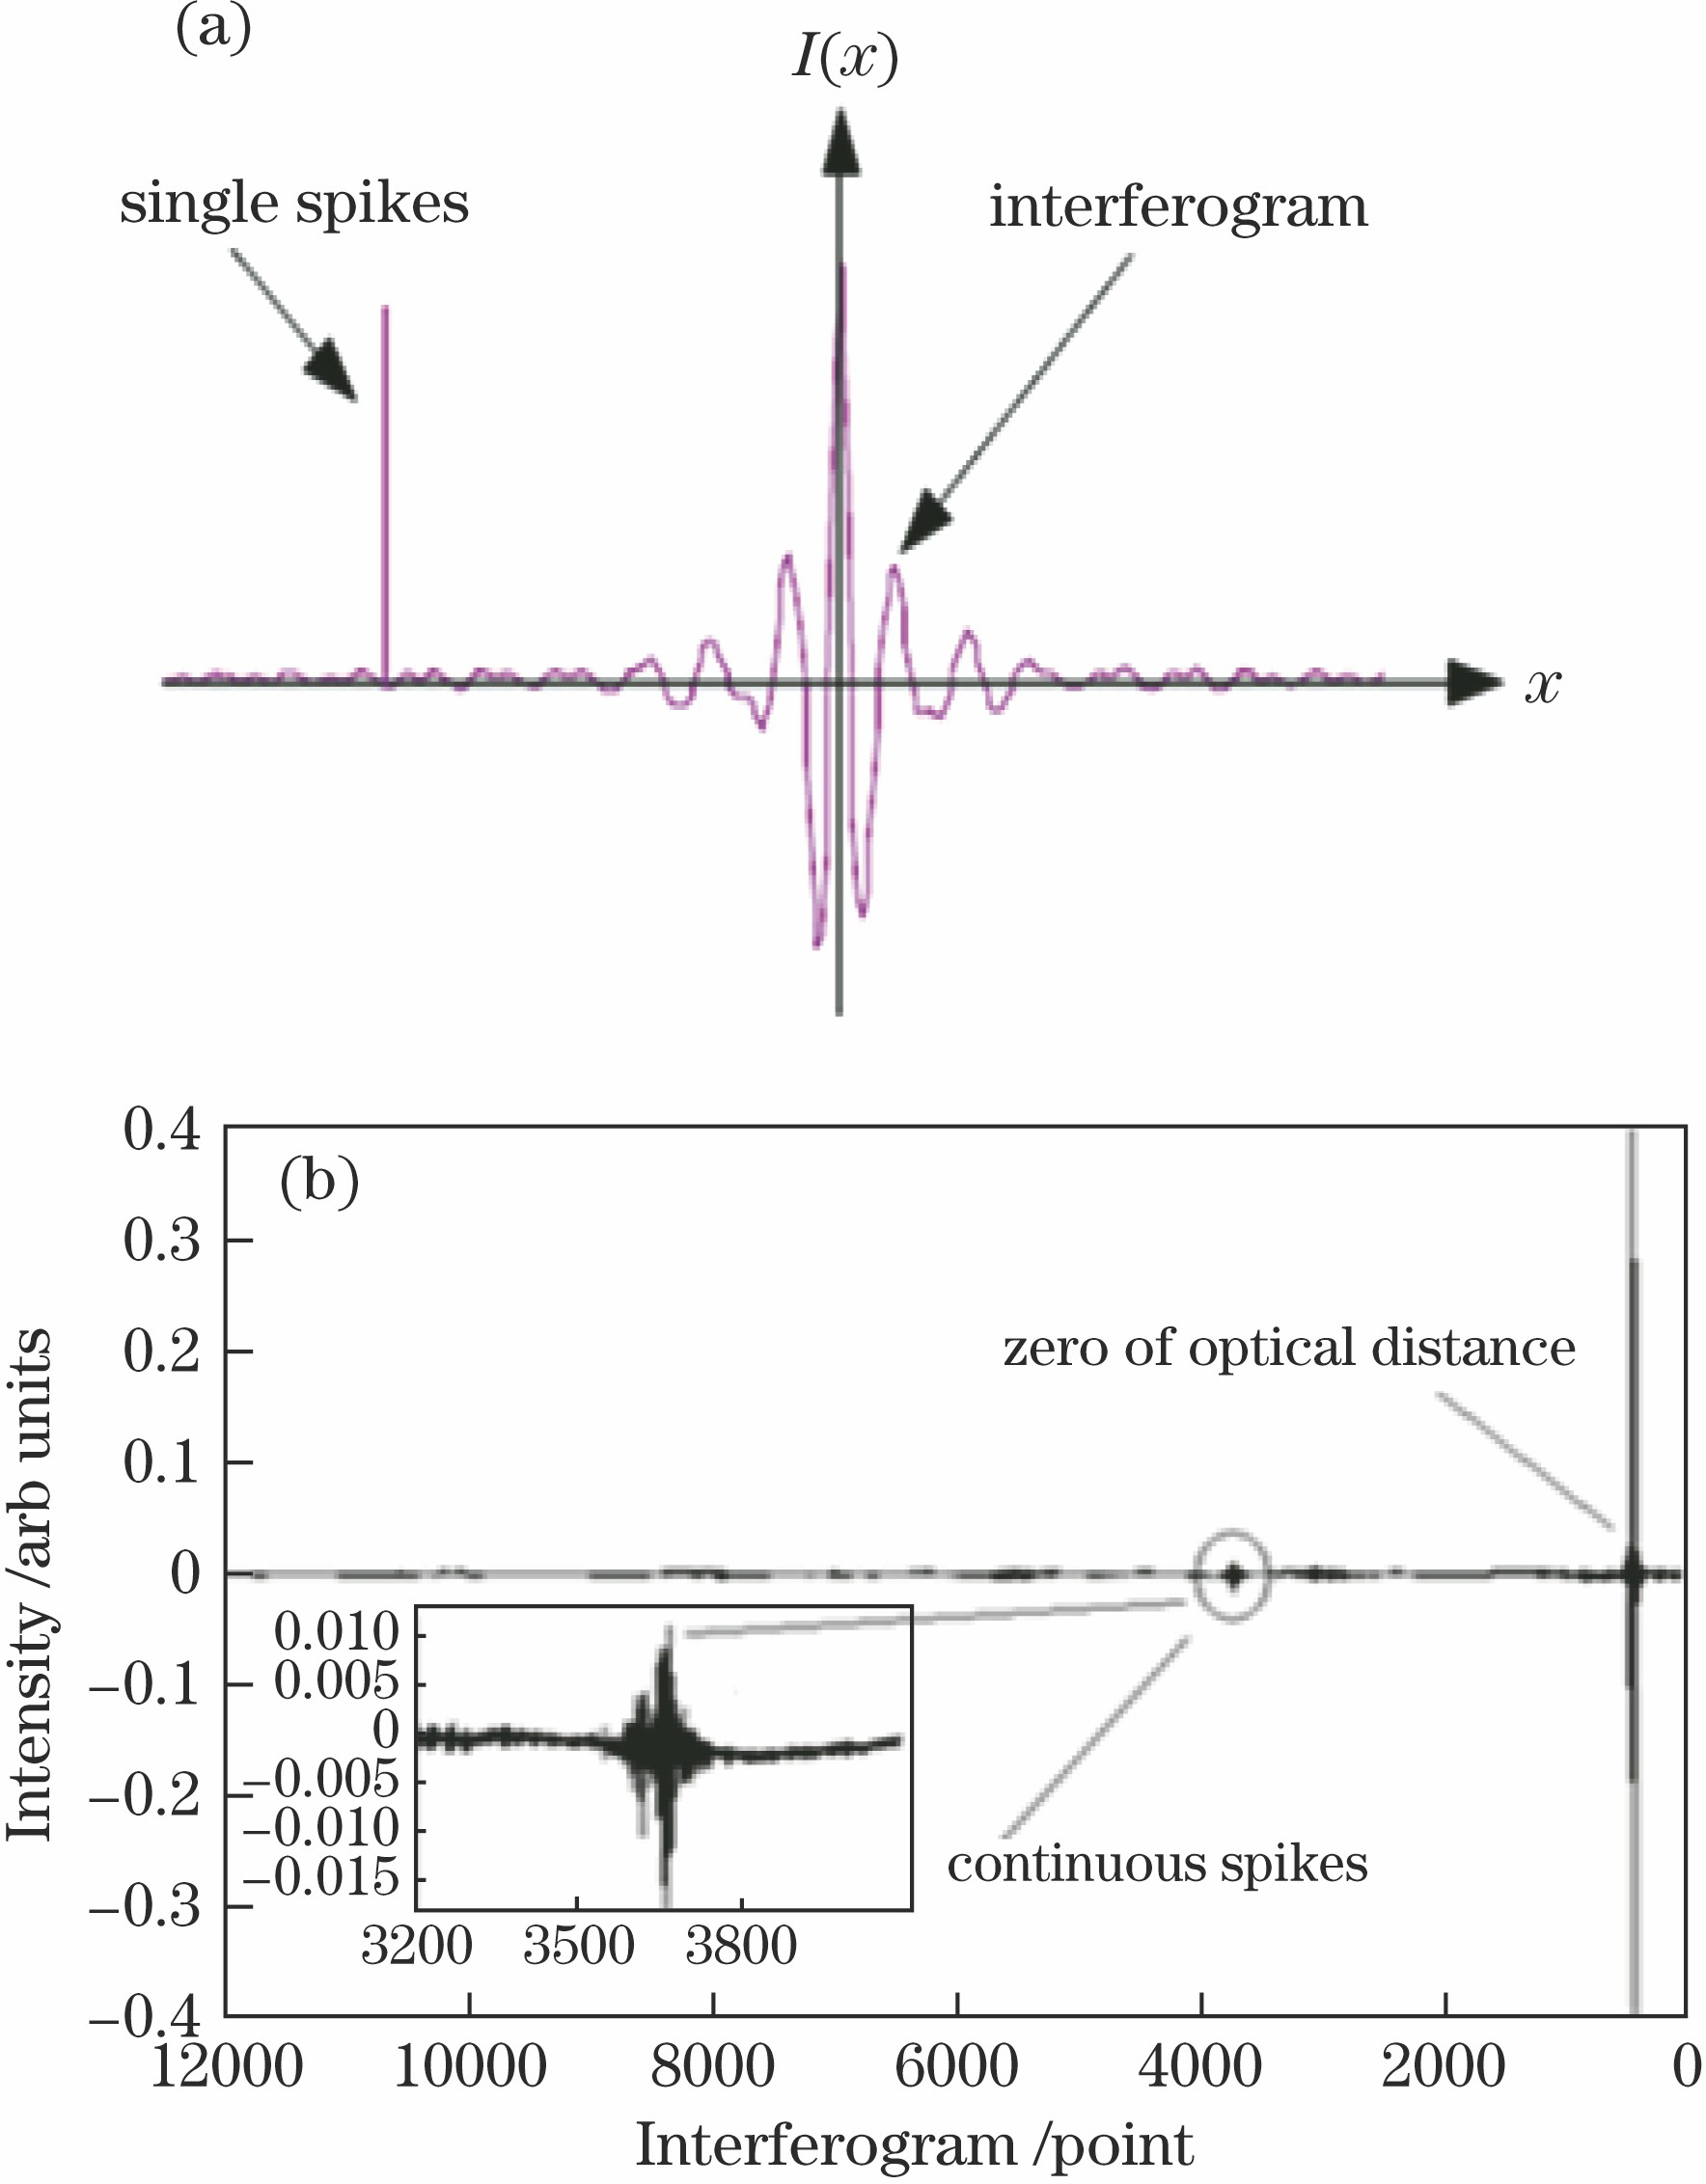 Spikes in interferogram. (a) Single spikes; (b) continuous spikes